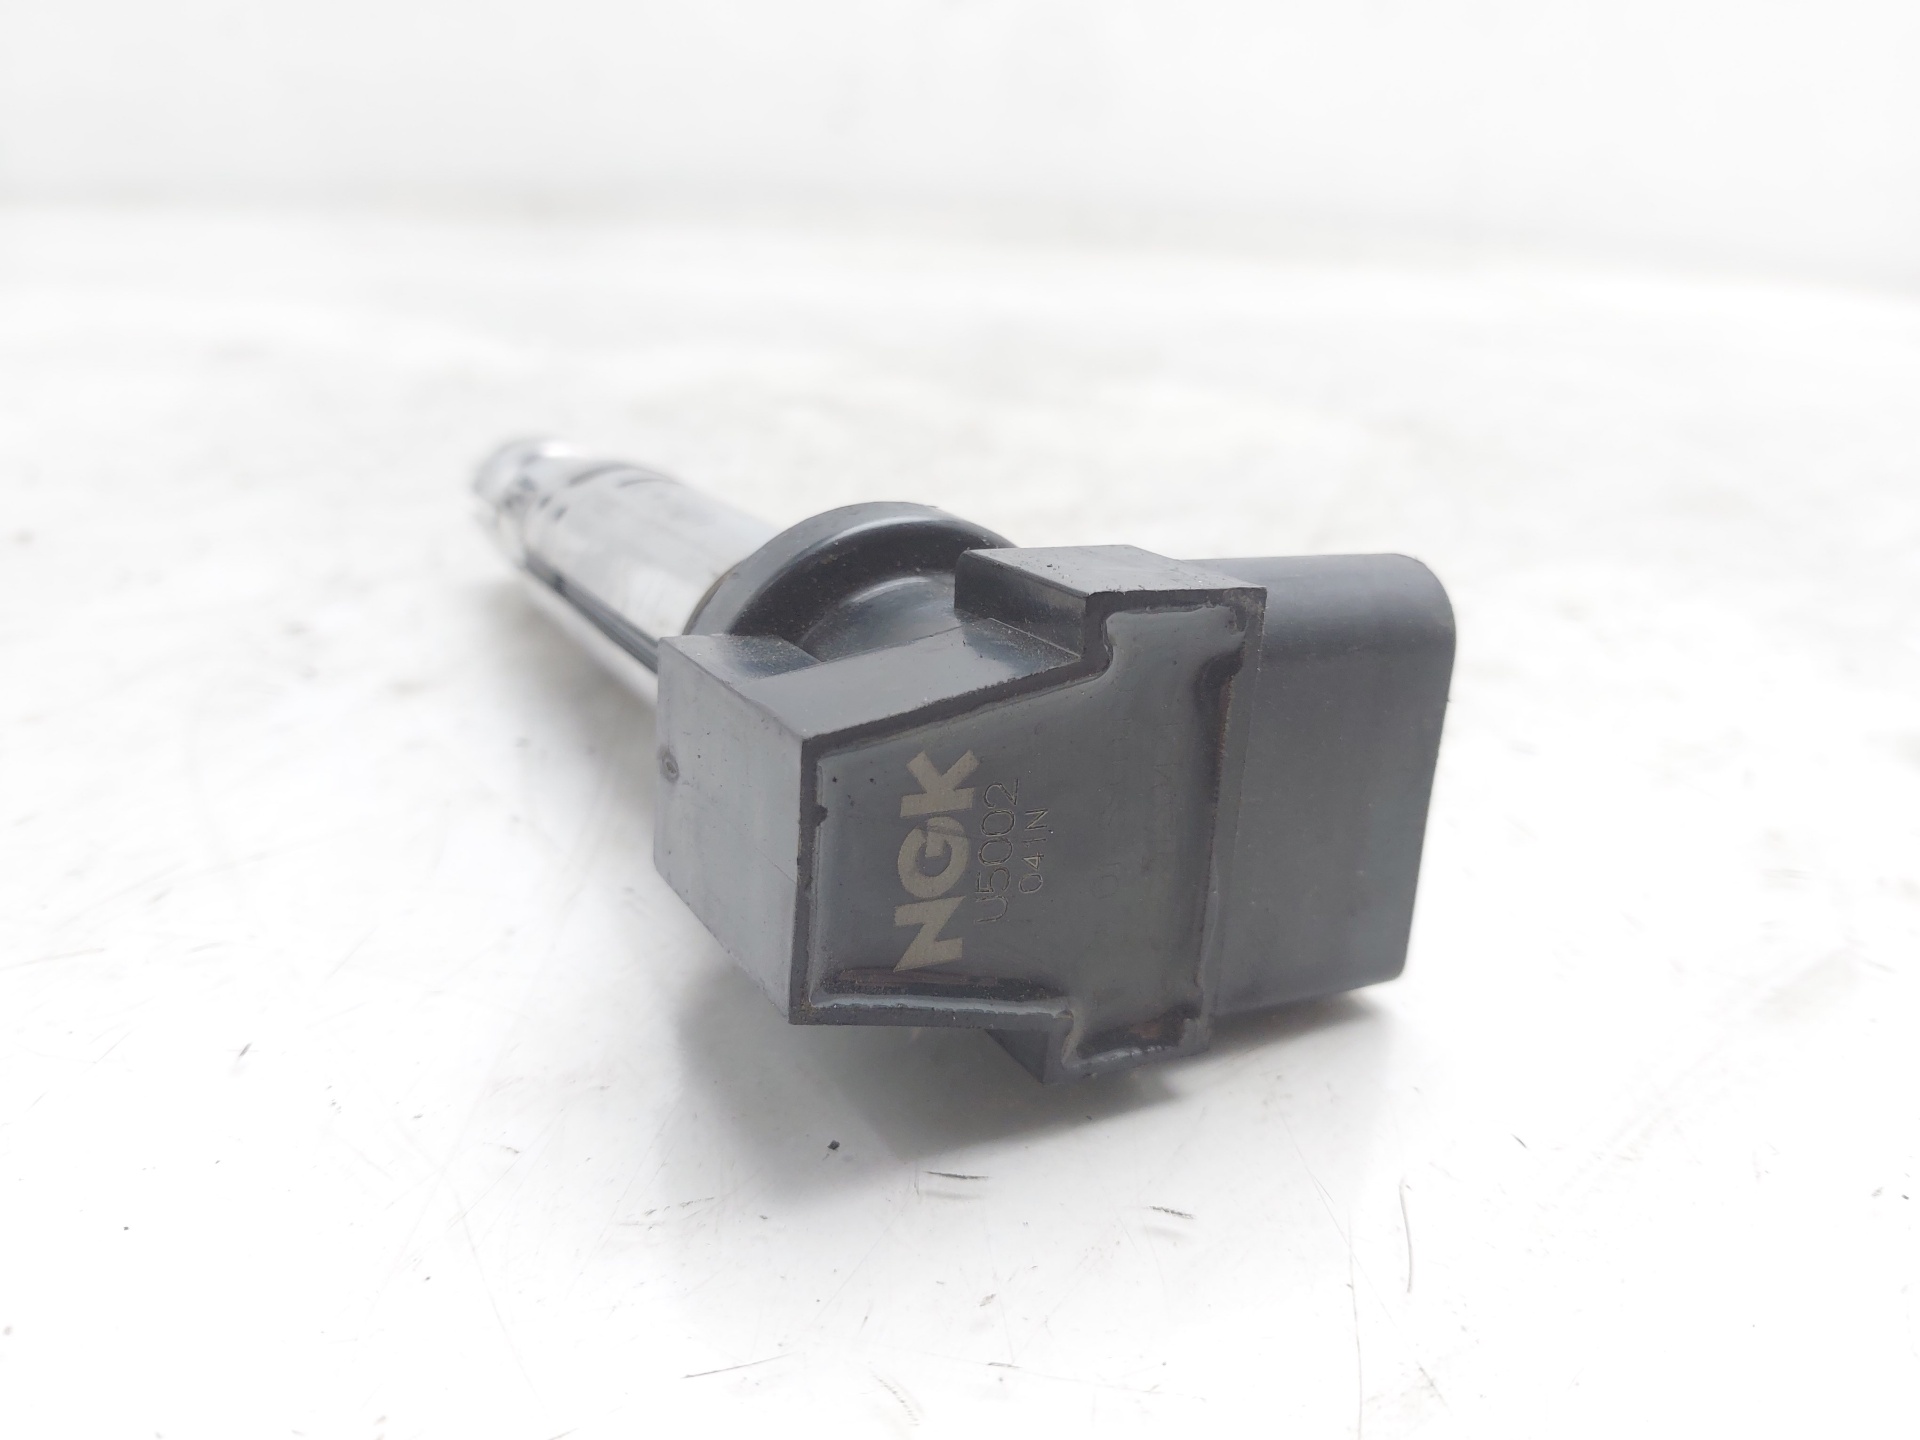 SEAT Leon 1 generation (1999-2005) High Voltage Ignition Coil 0986221023 25224415